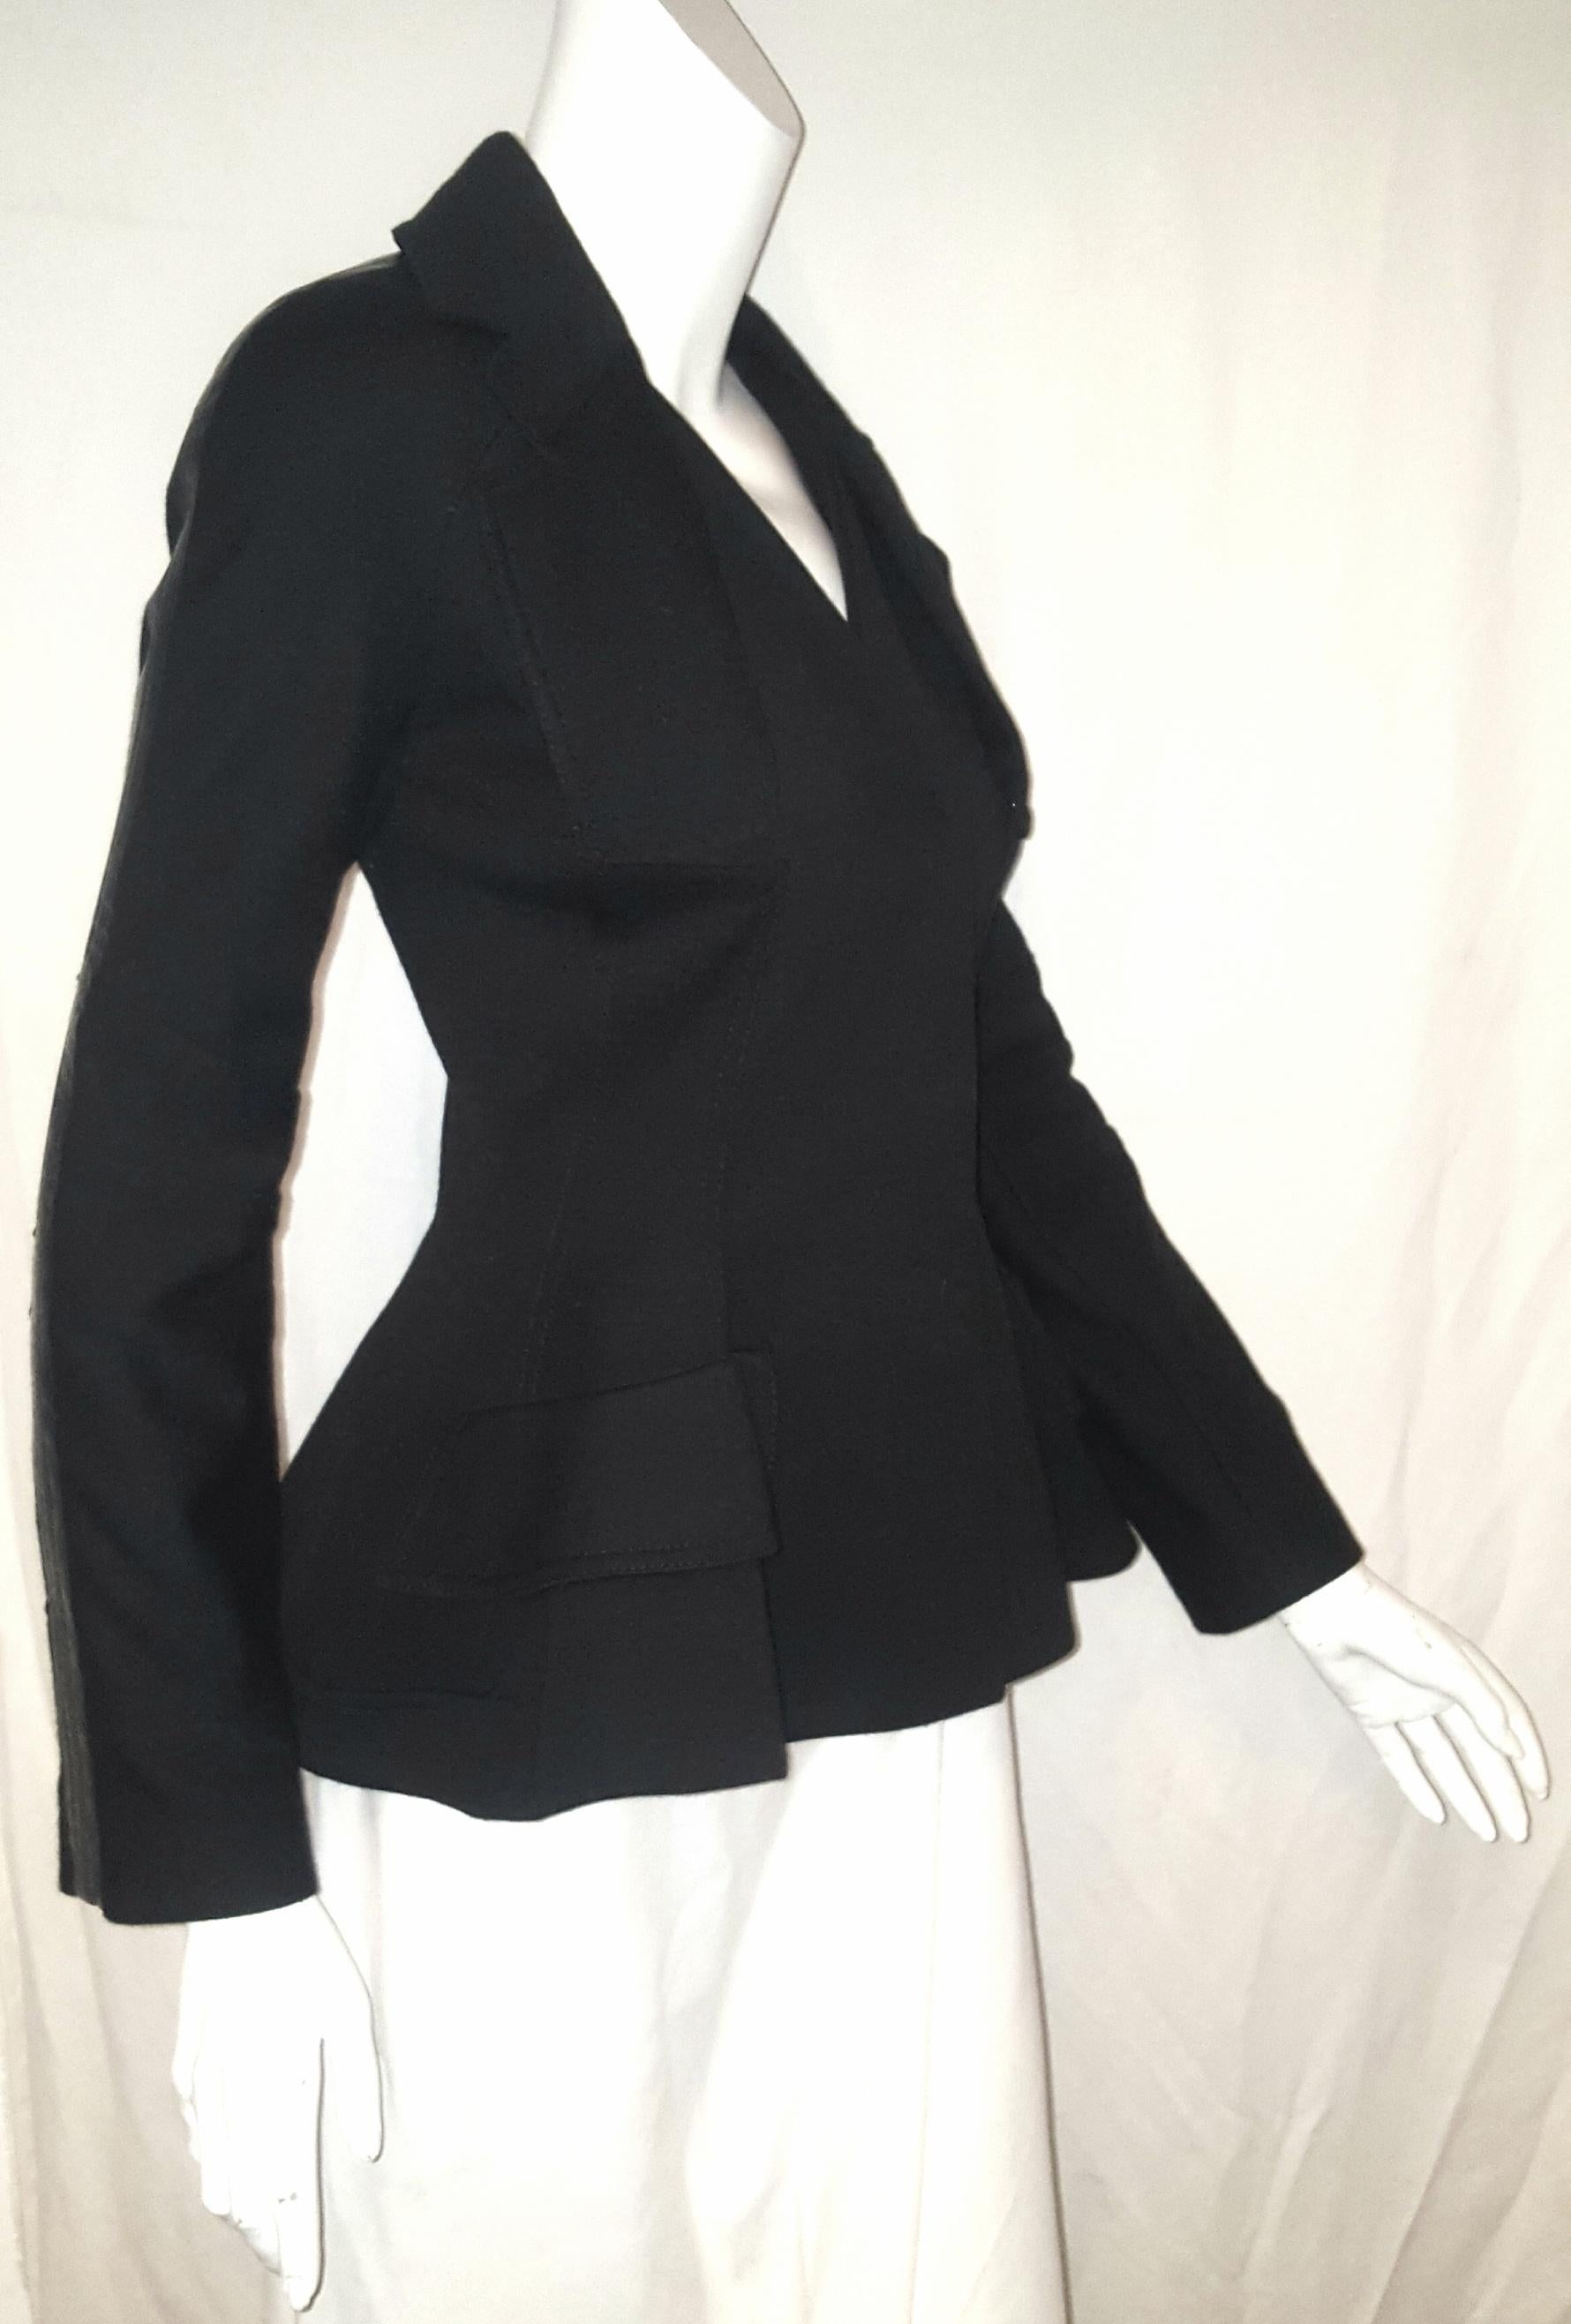 Christian Dior black wool blend jacket is styled with a faux vest insert at front.  With modified notch collar and containing 2 faux  flap pockets at front the hem is turned up and is gathered at the back vent and it comes up to the collar.  The